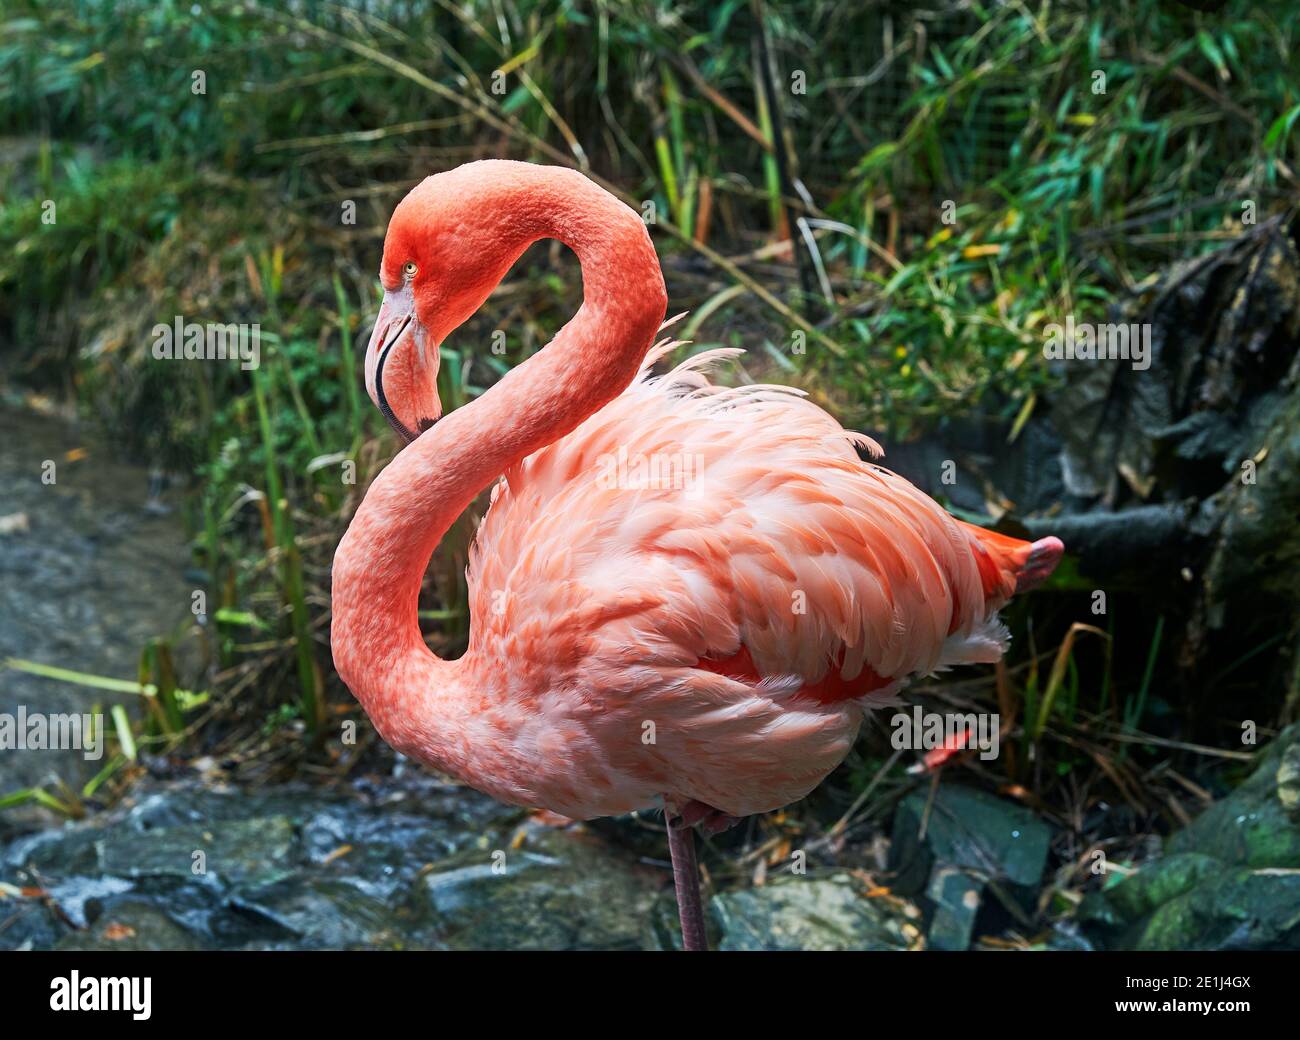 images and - hi-res stock P ruber Alamy photography